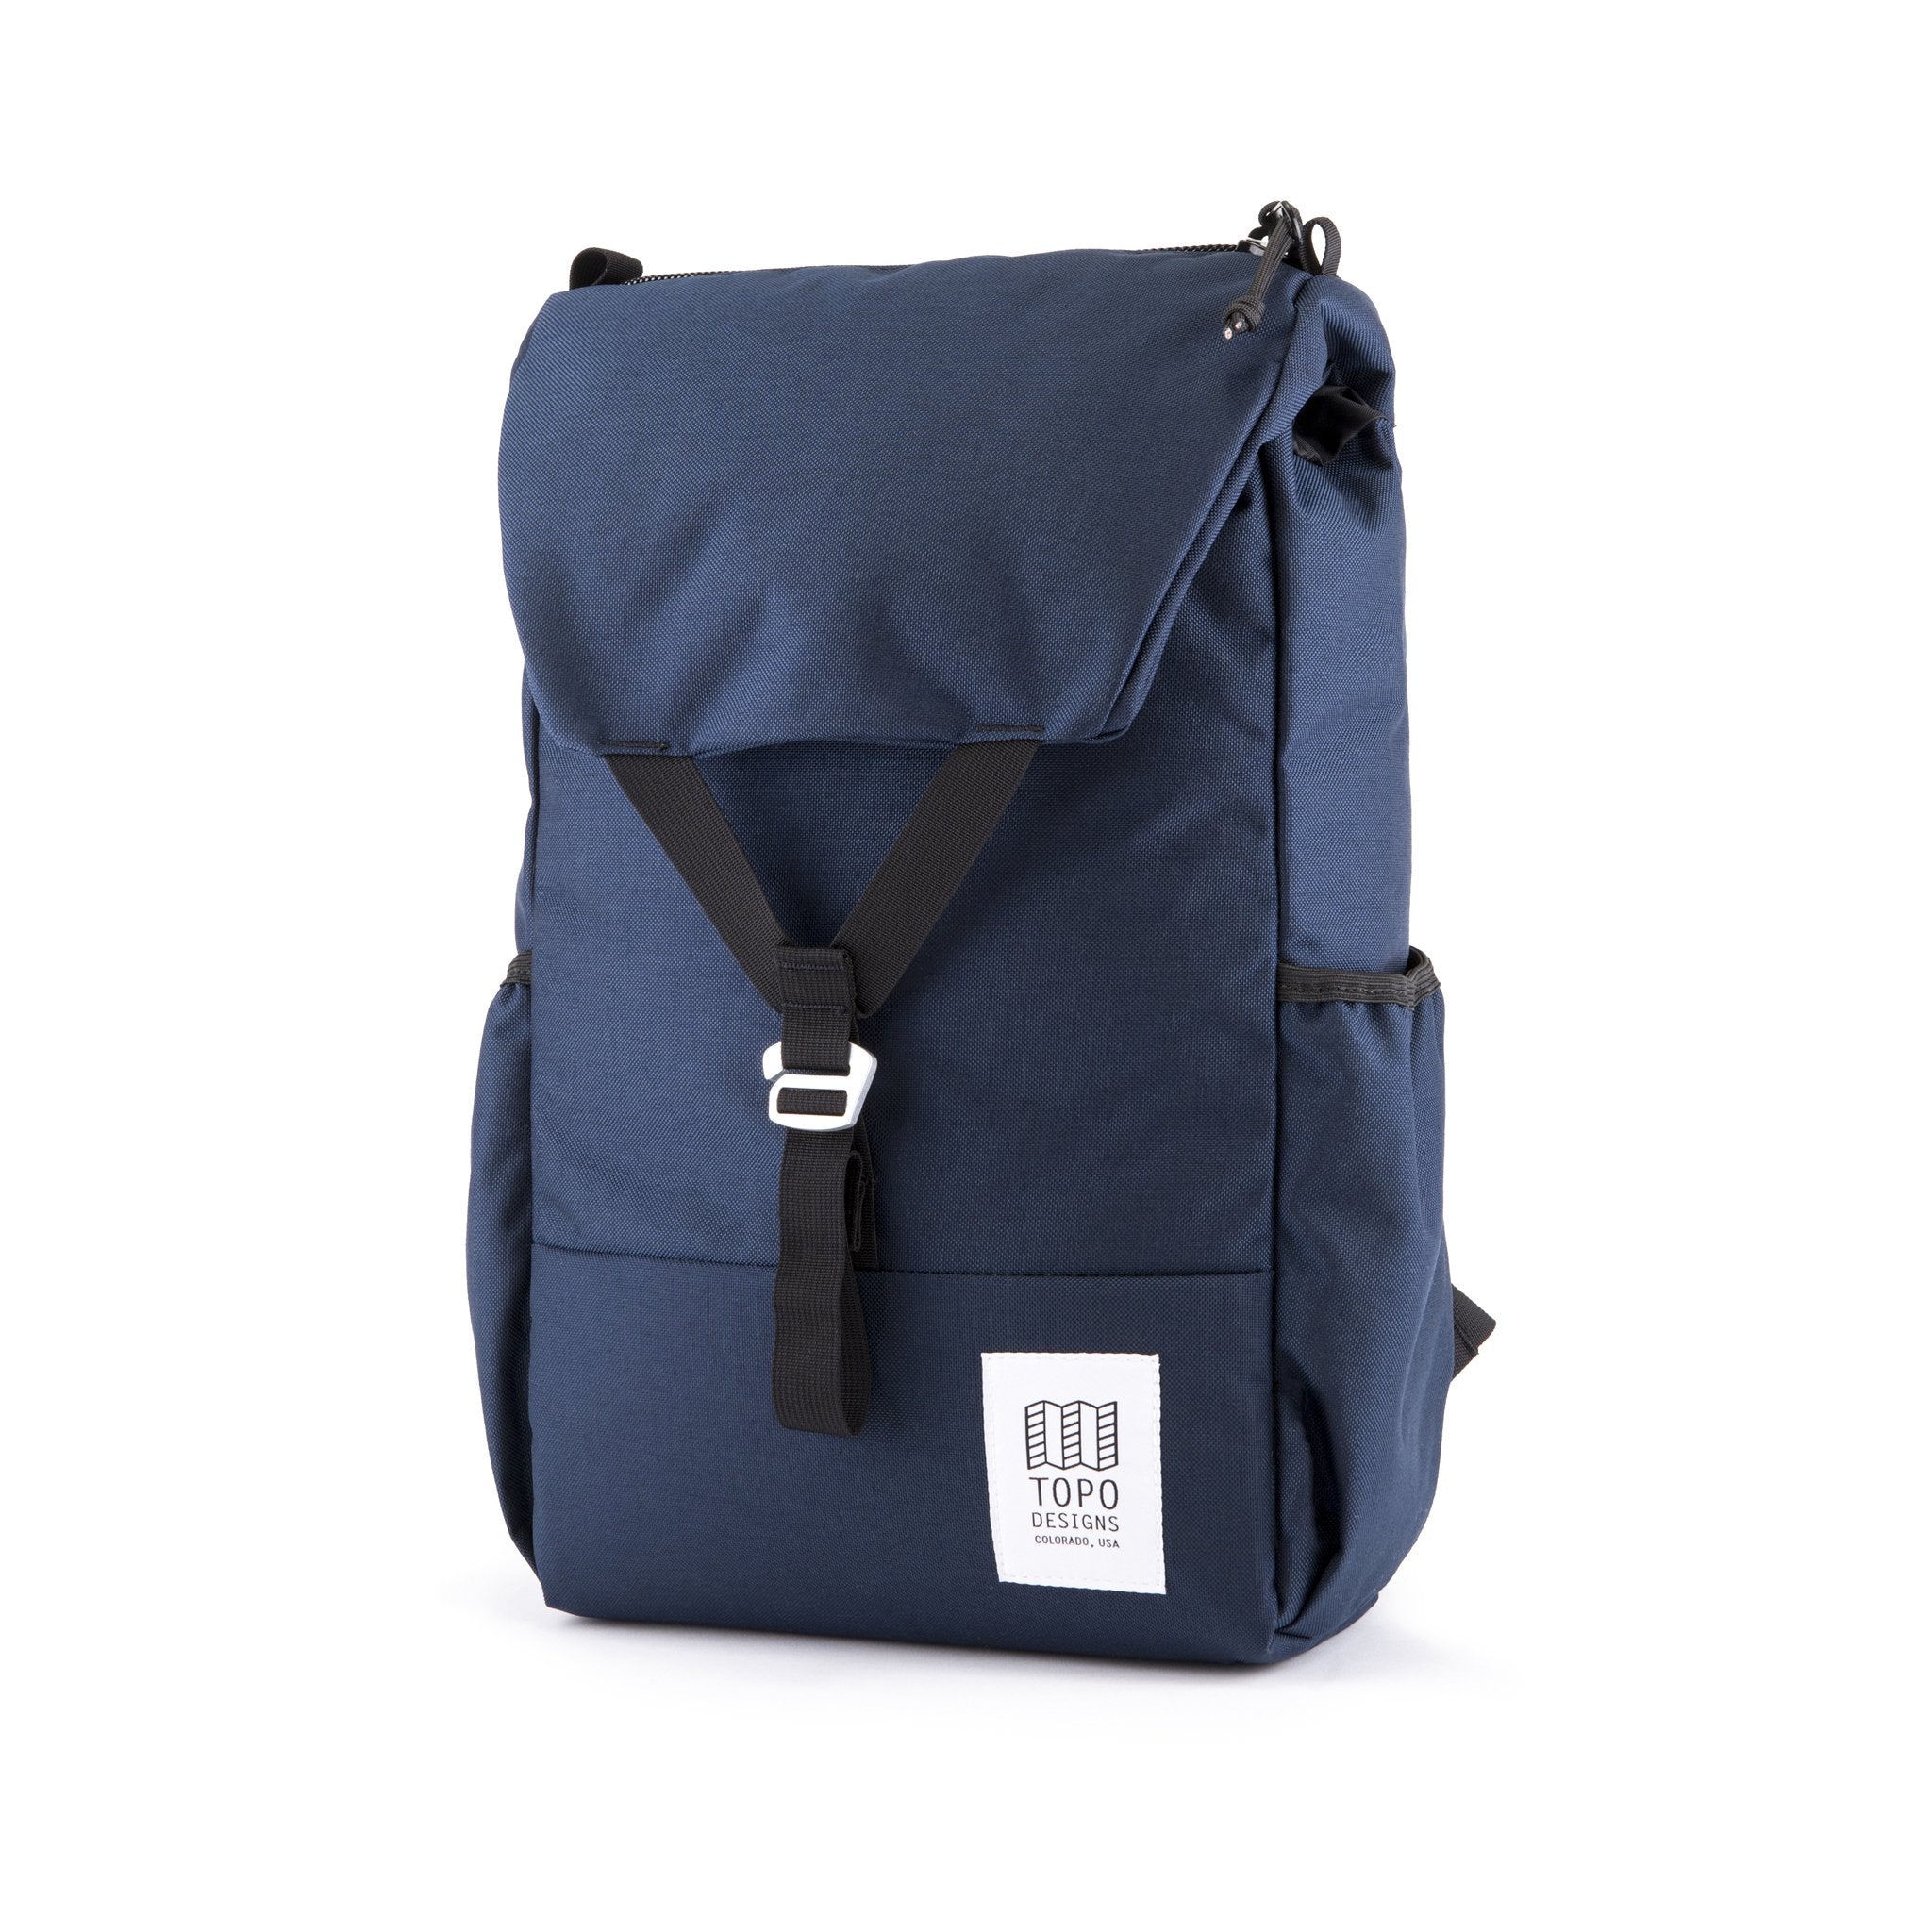 3/4 front product shot of Topo Designs Y-Pack in "navy" blue.